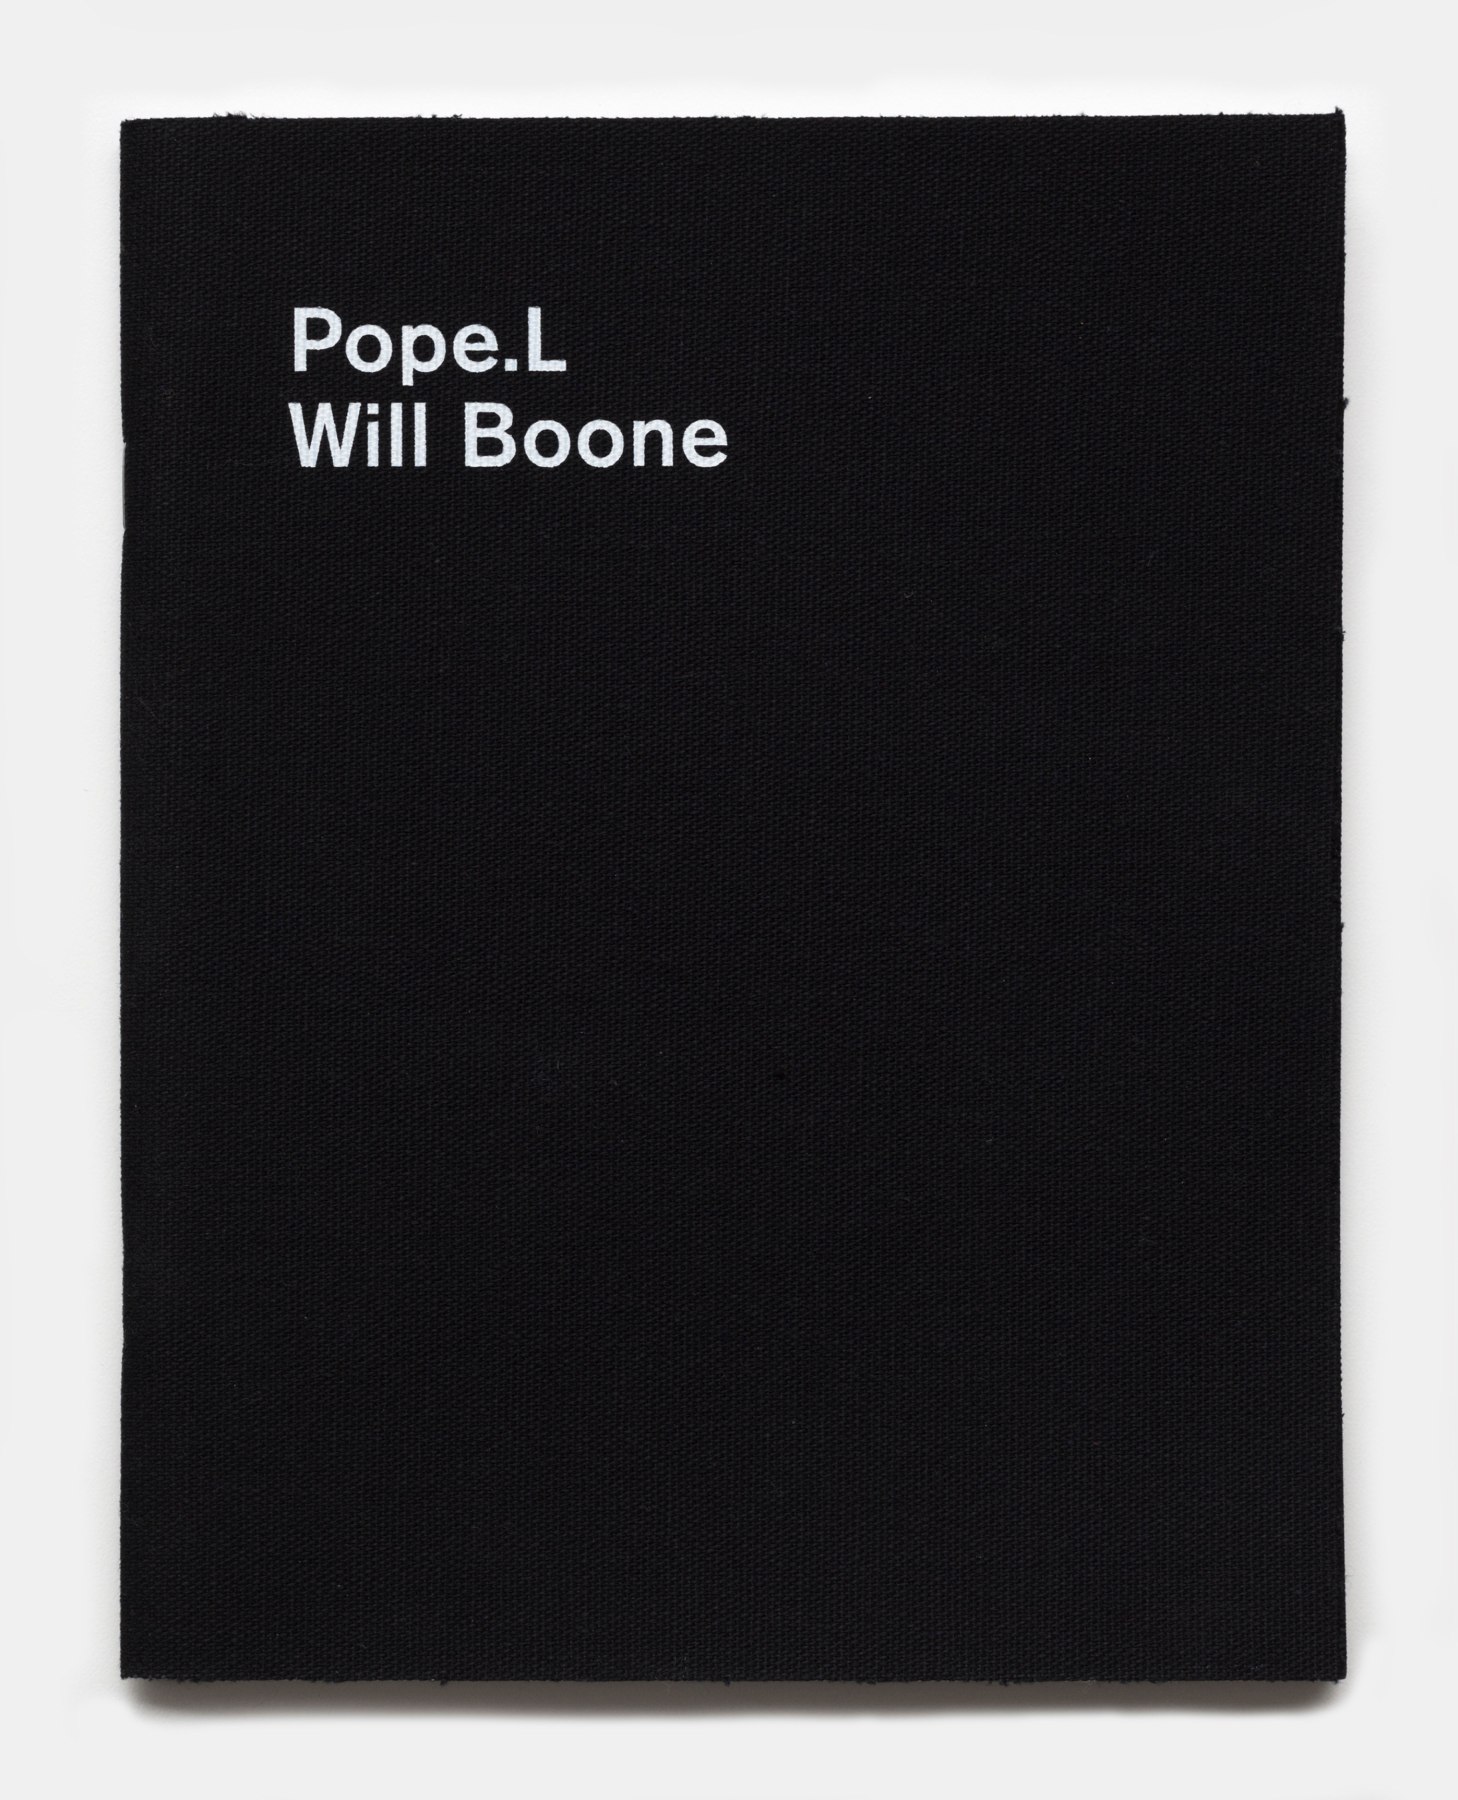 Will Boone and Pope.L